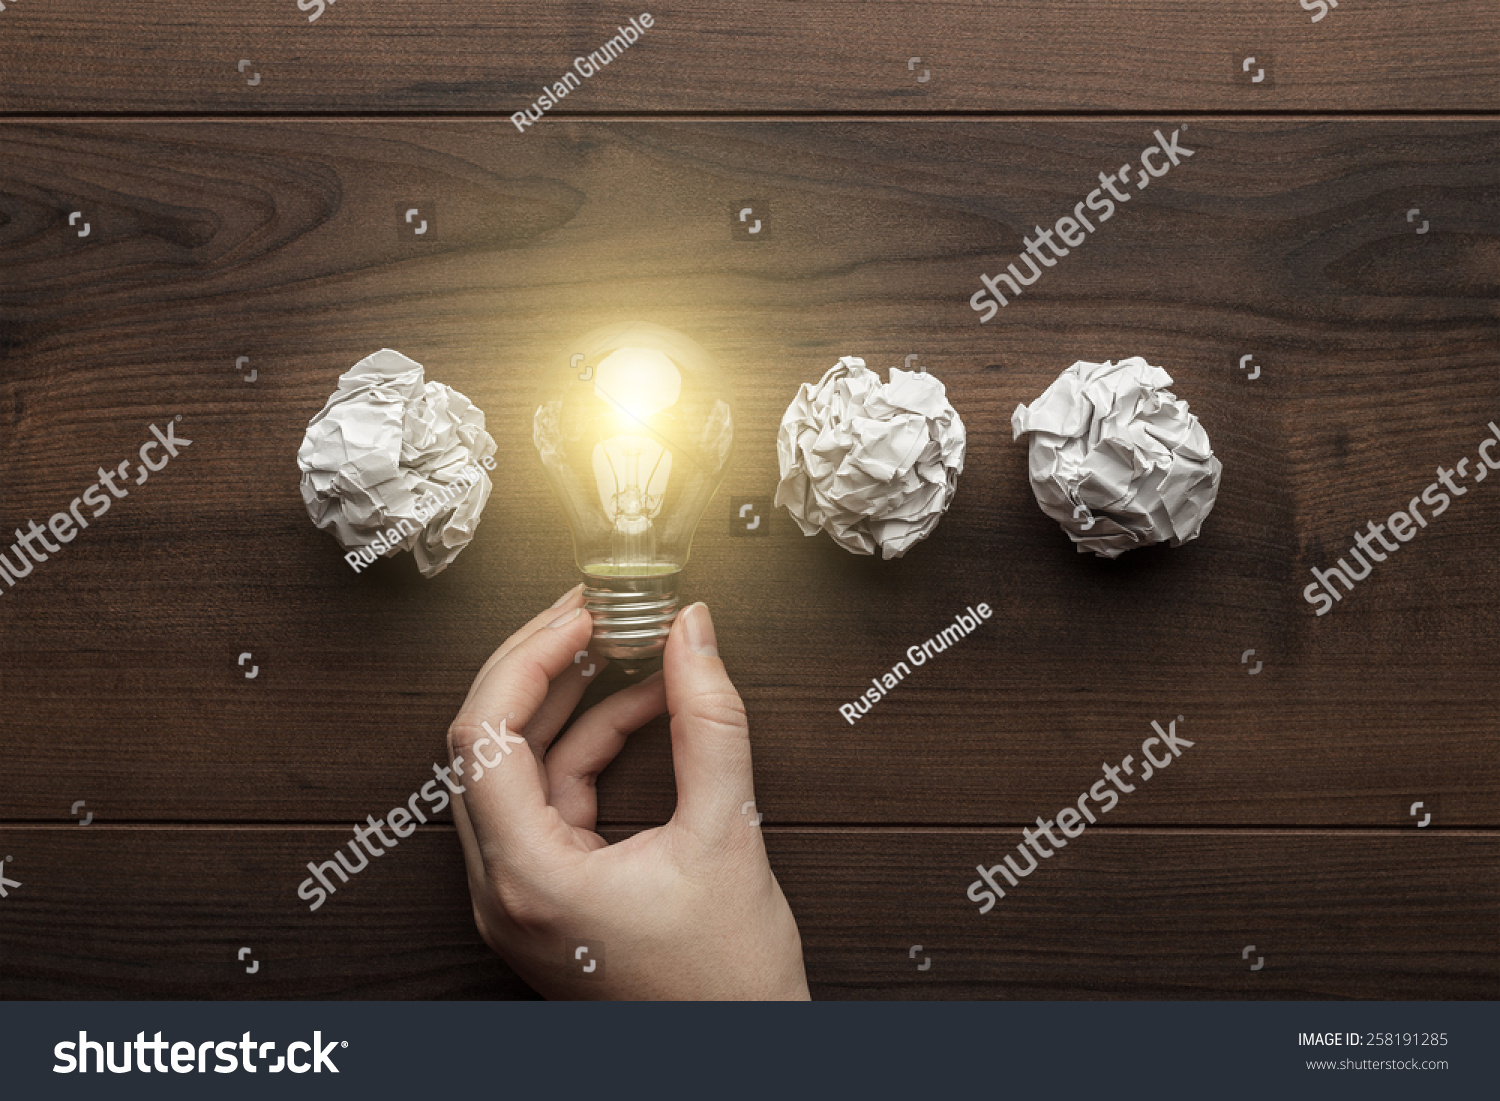 new idea concept with crumpled office paper, female hand holding light bulb #258191285